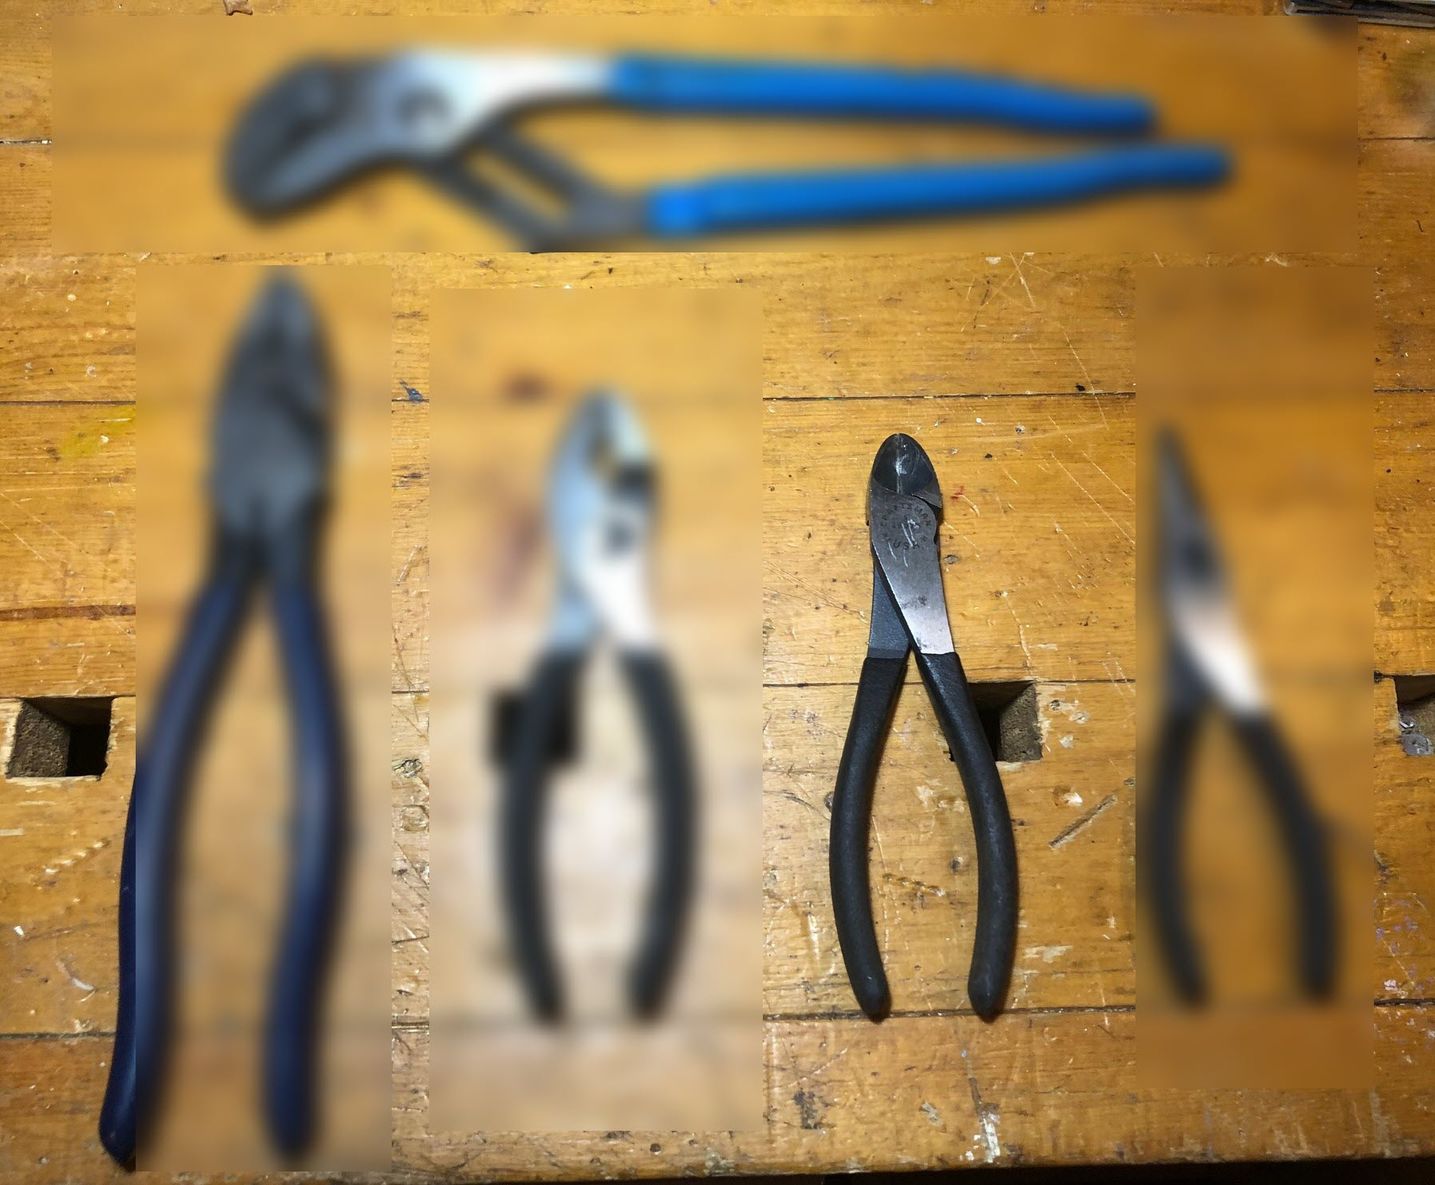 Craftsman diagonal cutters second from the right